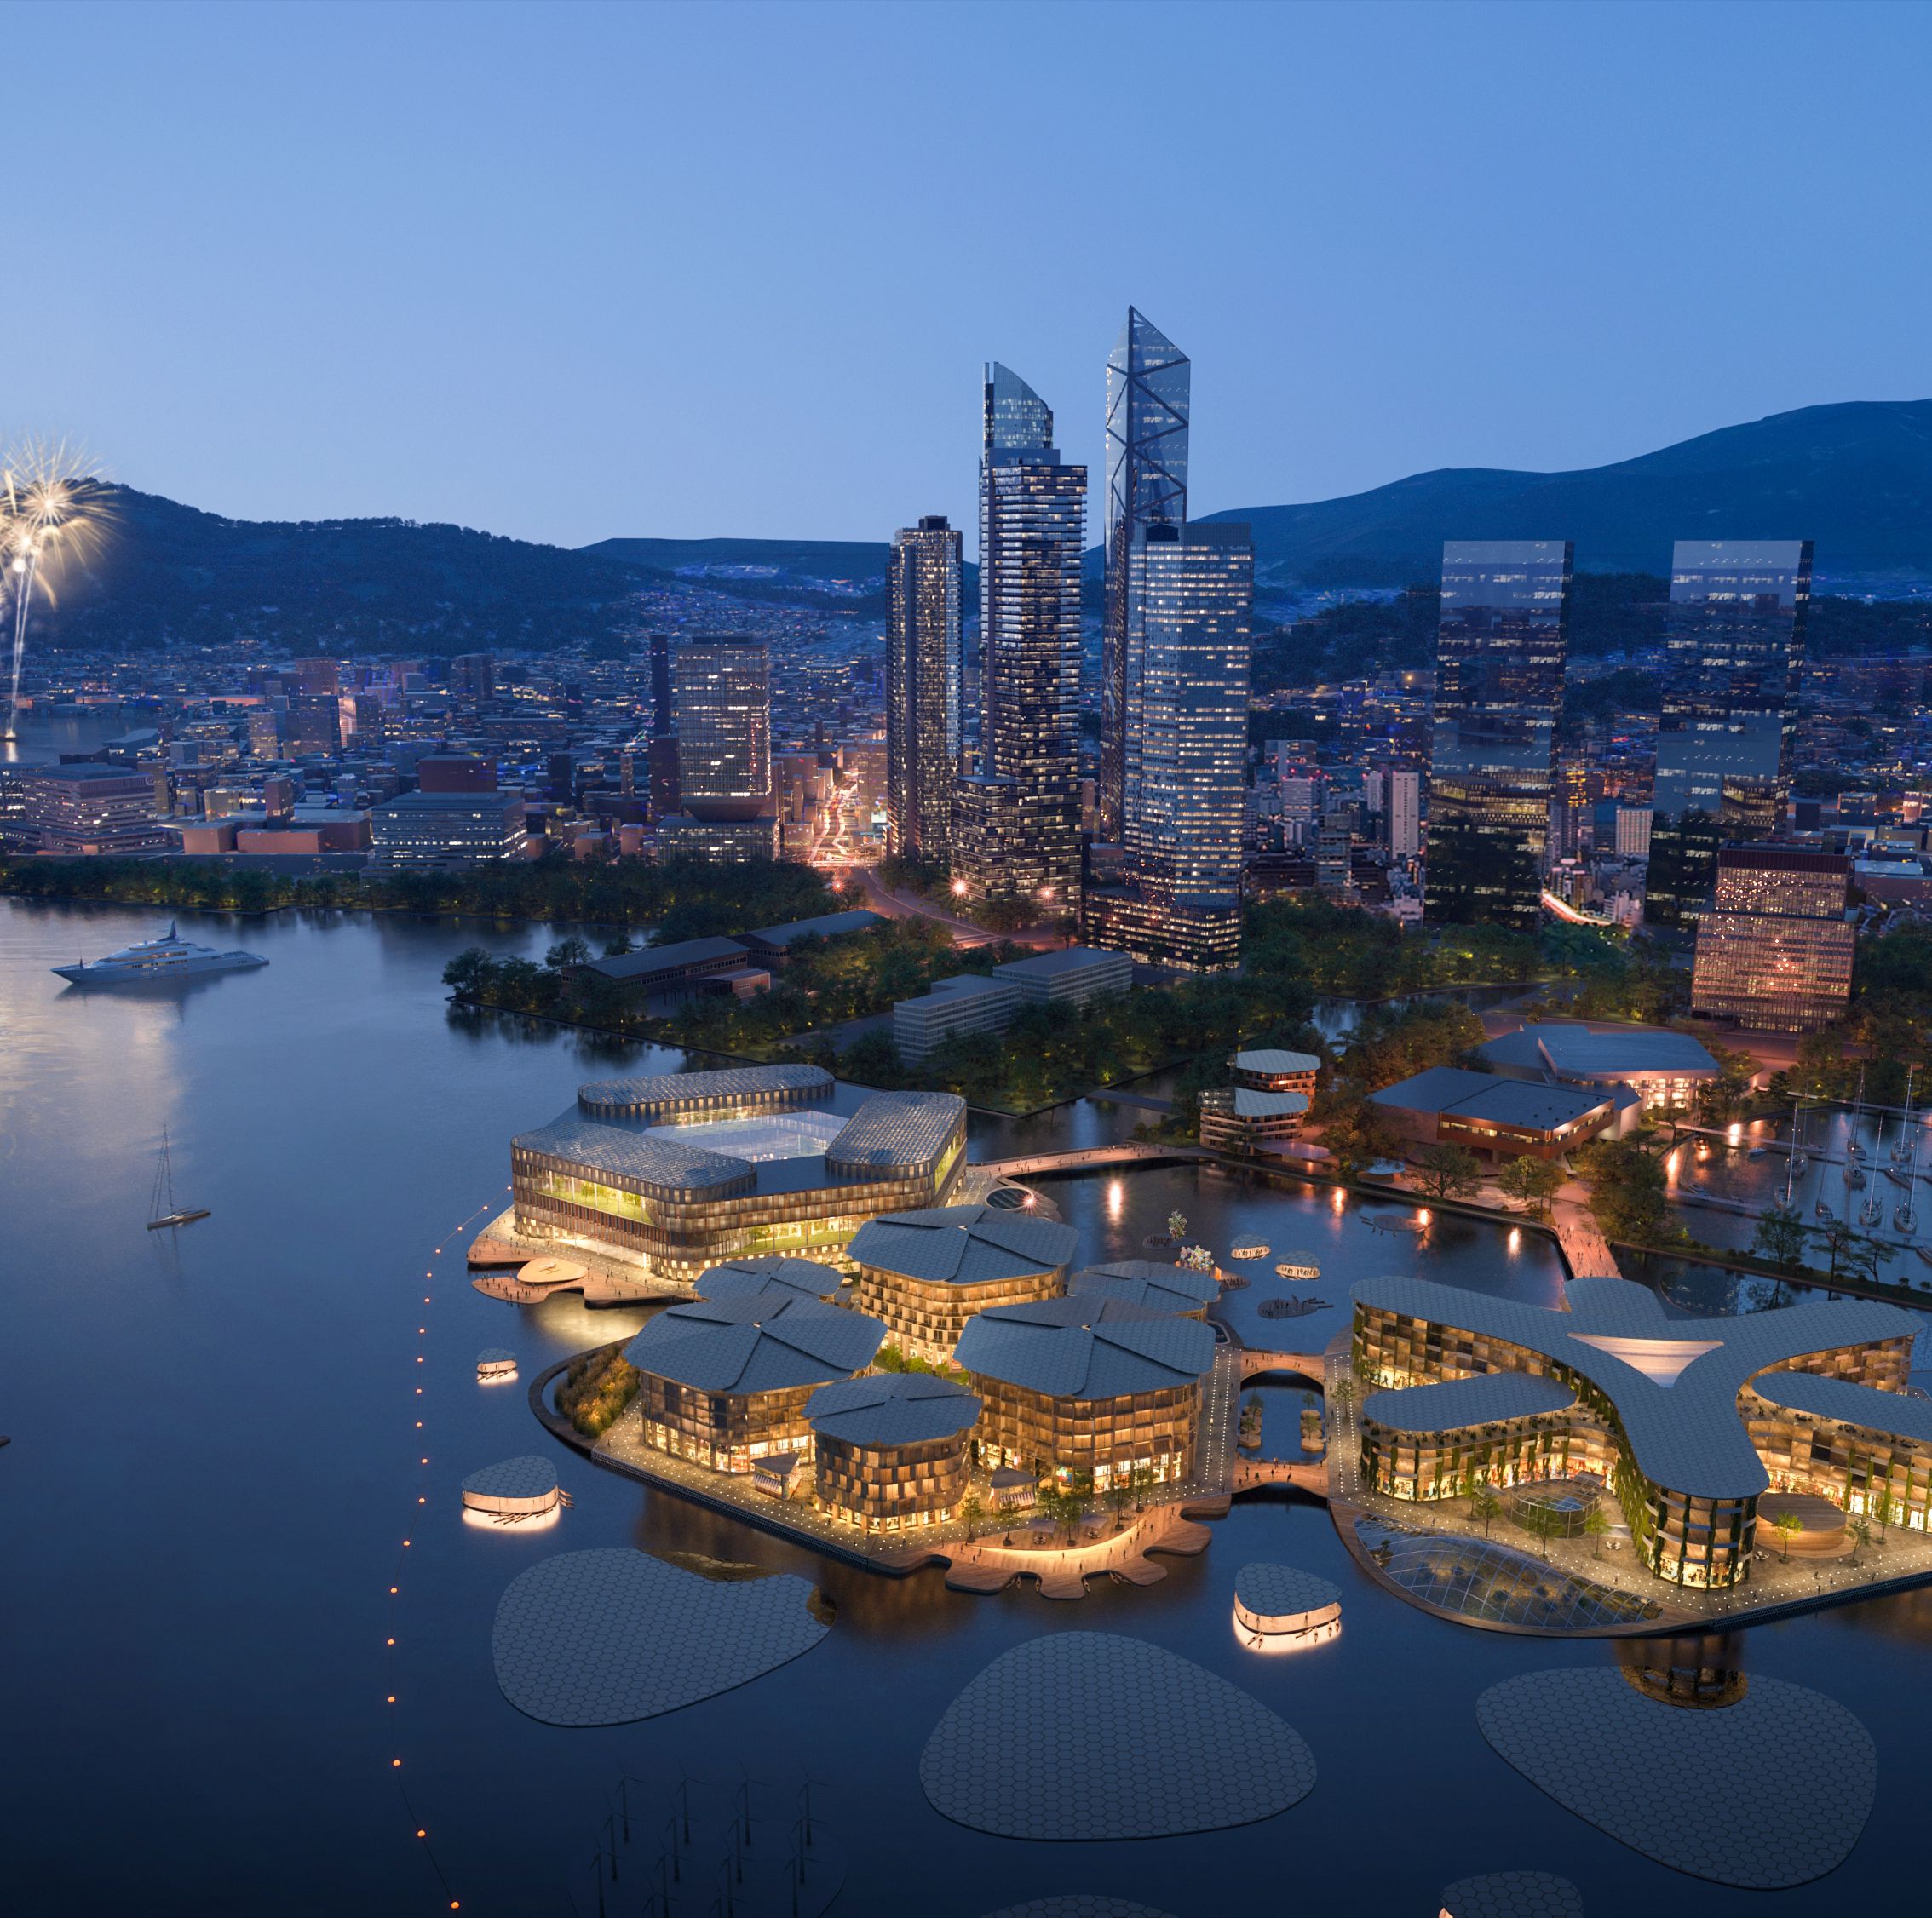 Can a Floating City Really Work?